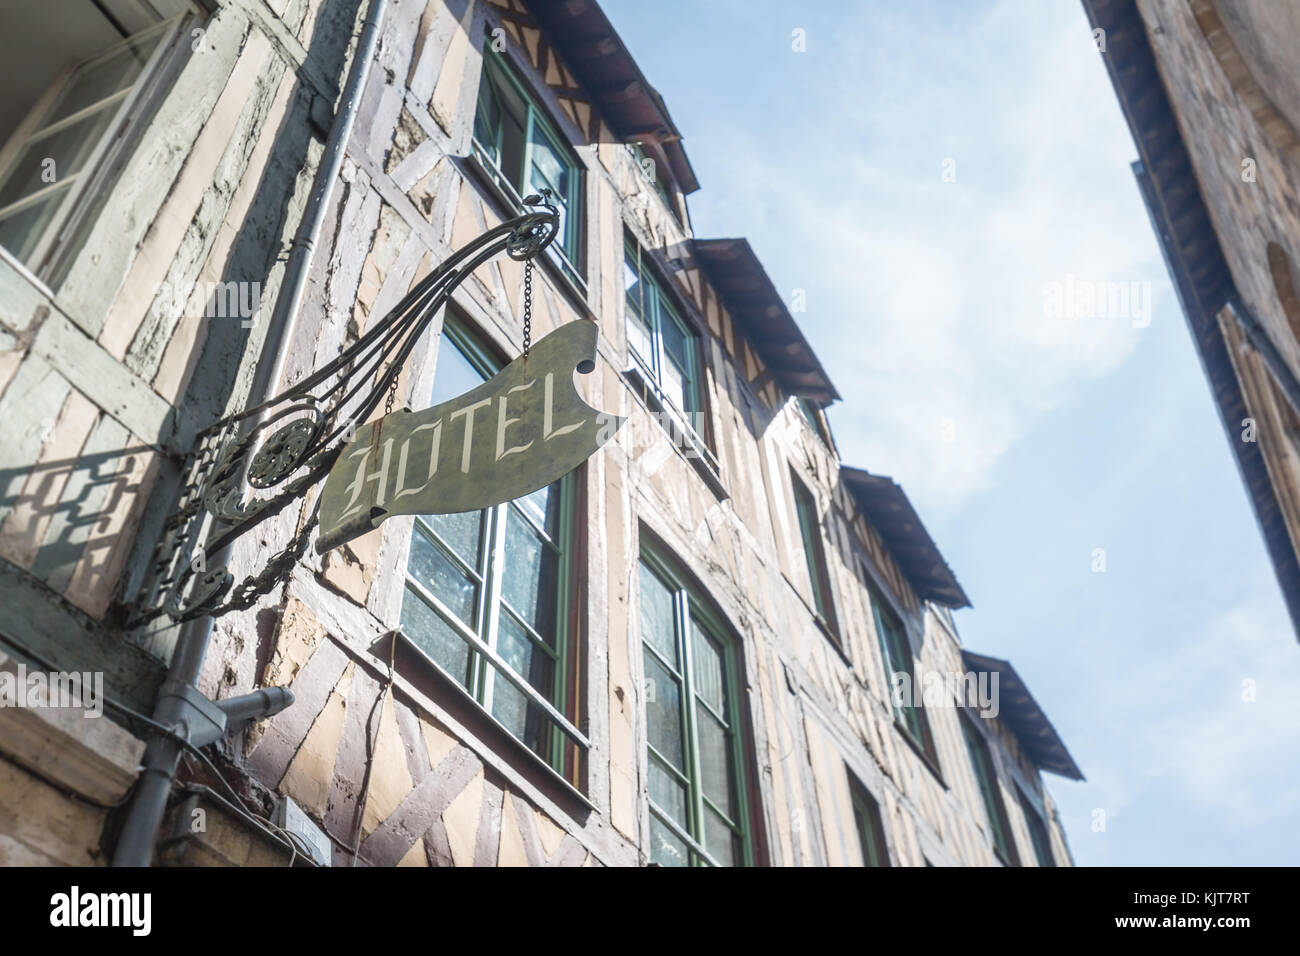 Metal hotel sign on an old studwork house in Rouen, Normandie, France Stock Photo